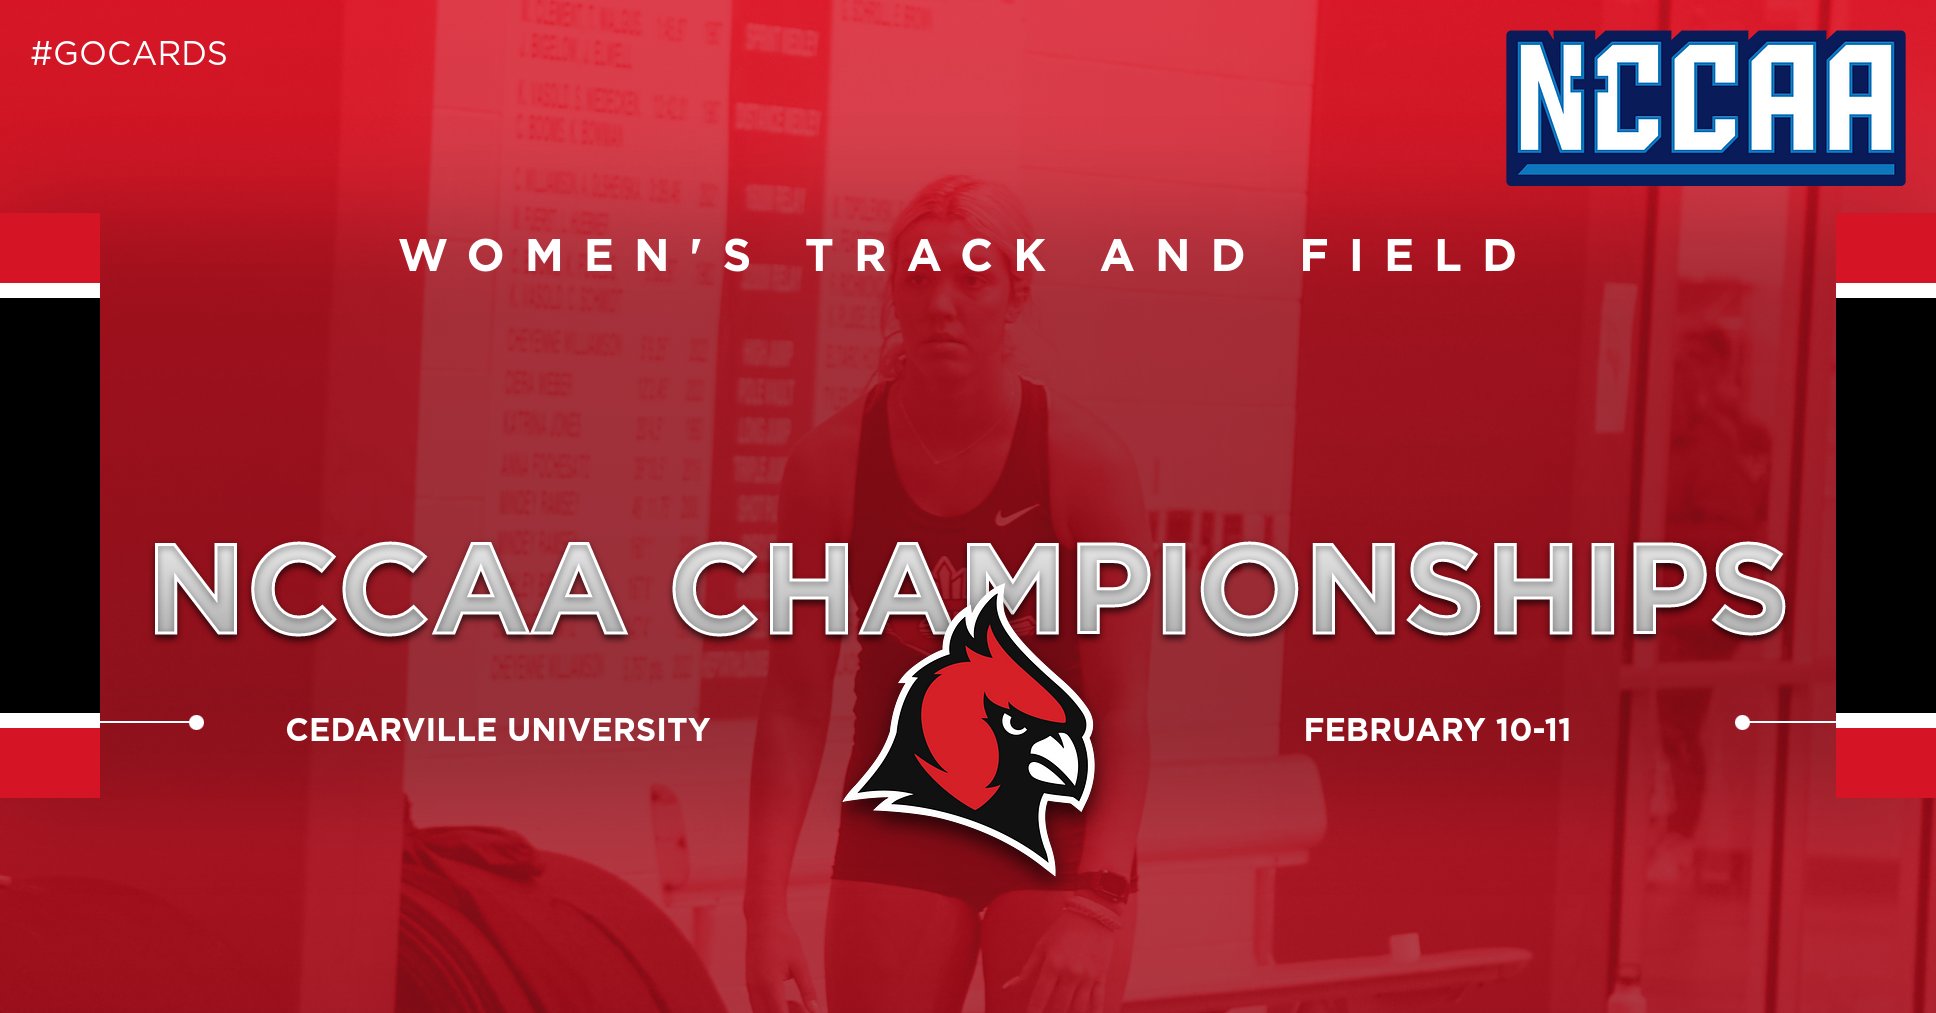 Women's Track and Field prepared for NCCAA Championships